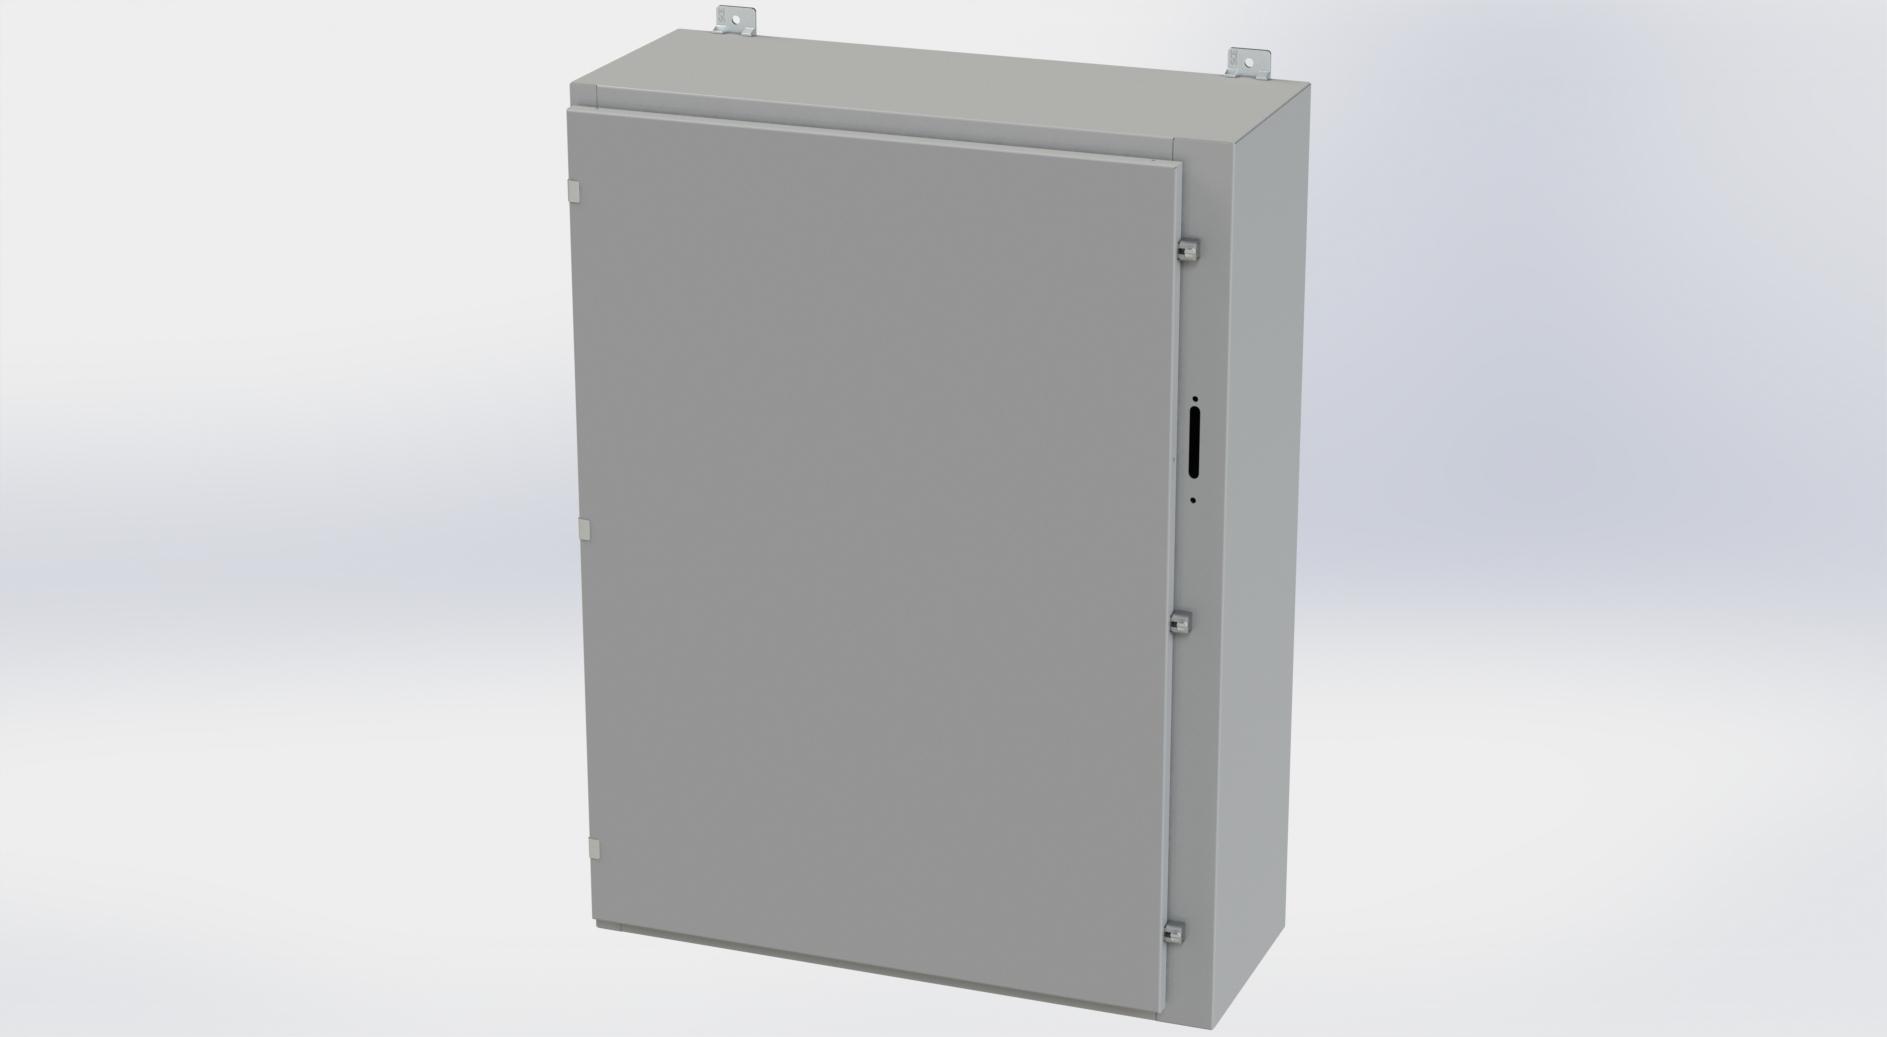 Saginaw Control SCE-42HS3112LP HS LP Enclosure, Height:42.00", Width:31.38", Depth:12.00", ANSI-61 gray powder coating inside and out. Optional sub-panels are powder coated white.